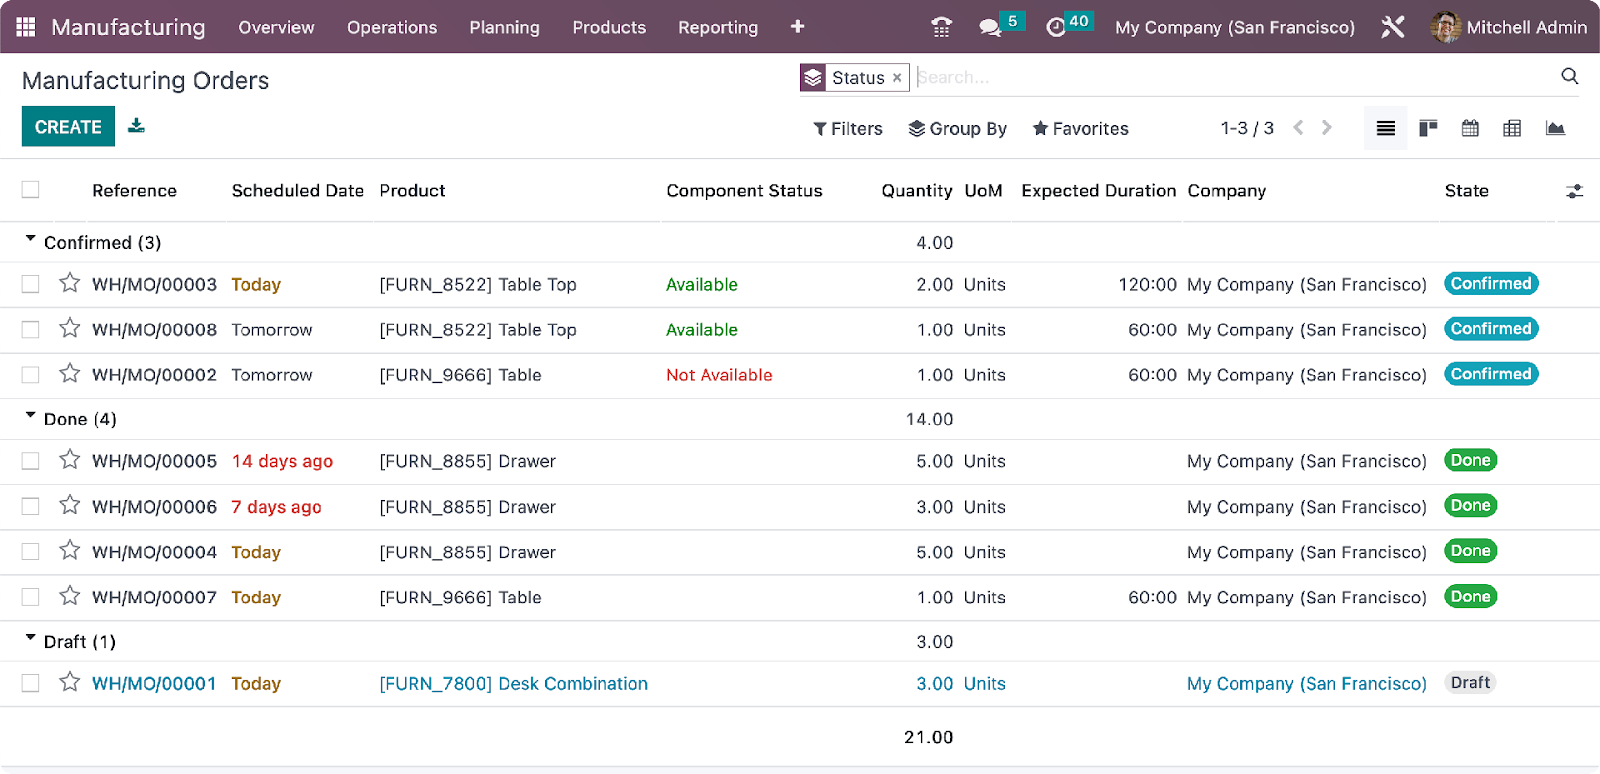 Manufacturing Orders dashboard in Odoo, organized by production stage.